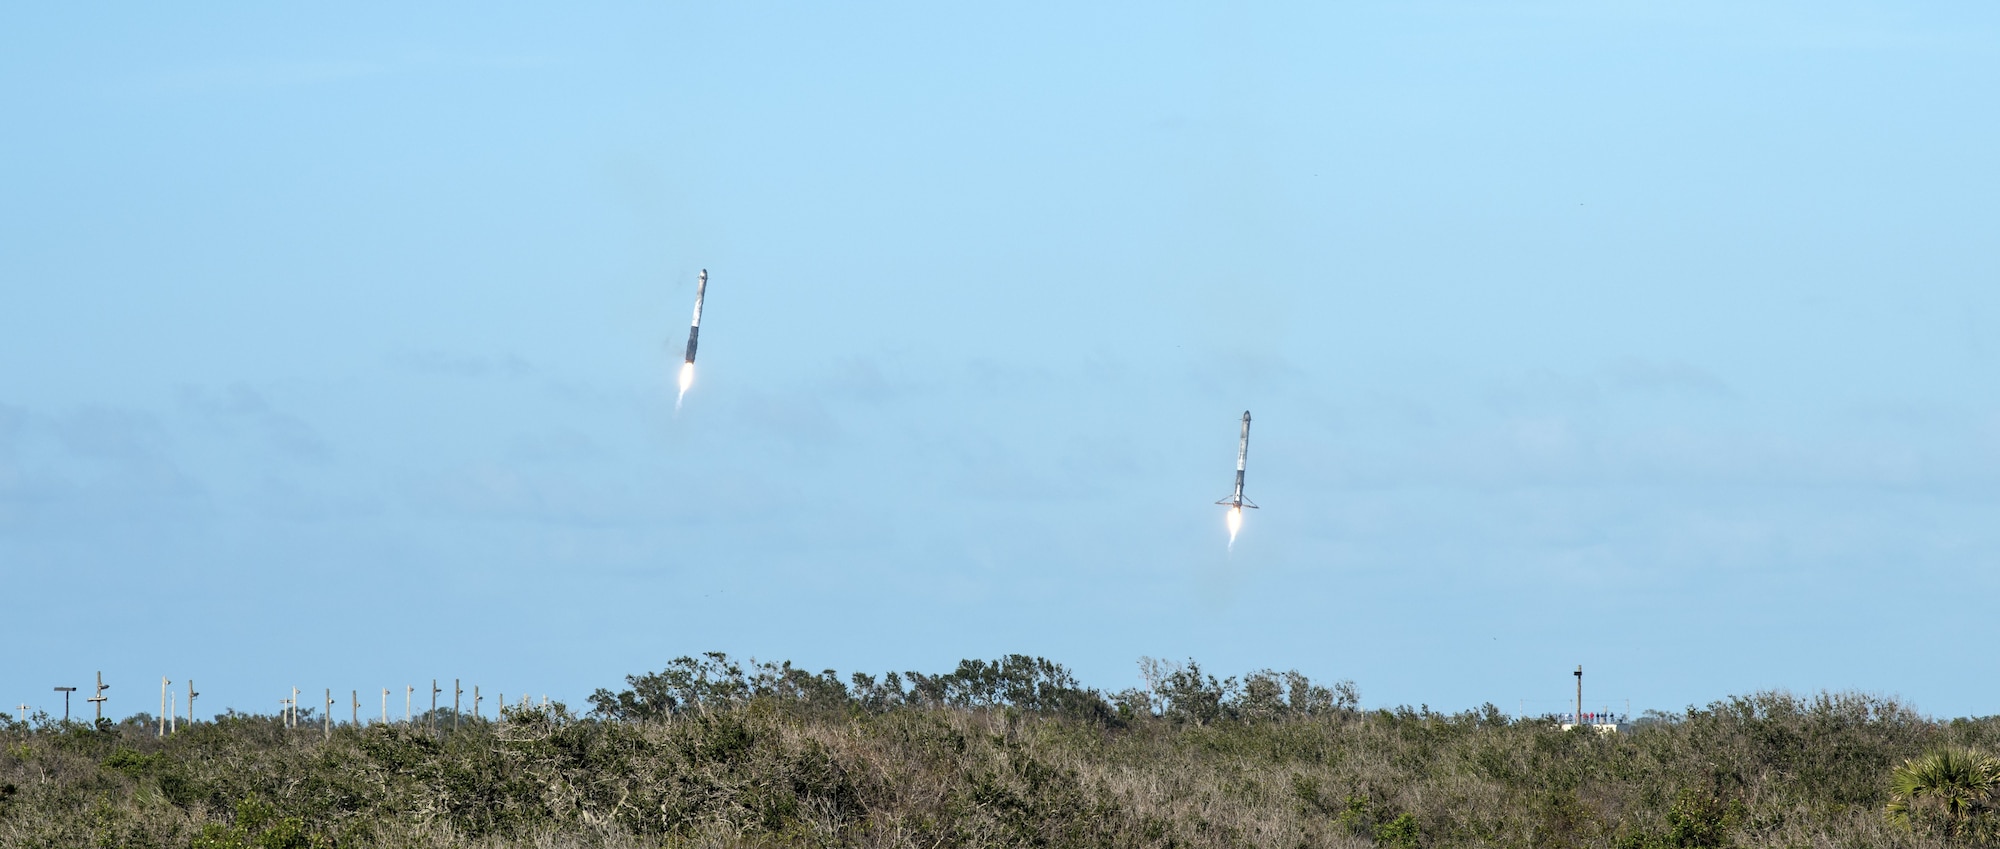 Two boosters from SpaceX's Falcon Heavy rocket approach Landing Zones 1 and 2, located at Cape Canaveral Air Force Station, Fla. on Feb. 6, 2018. The rocket, which lifted off from the historic launchpad 39A at NASA’s Kennedy Space Center, is now the most powerful launch vehicle in operation anywhere in the world. (U.S. Air Force photo by Airman Zoe Thacker)